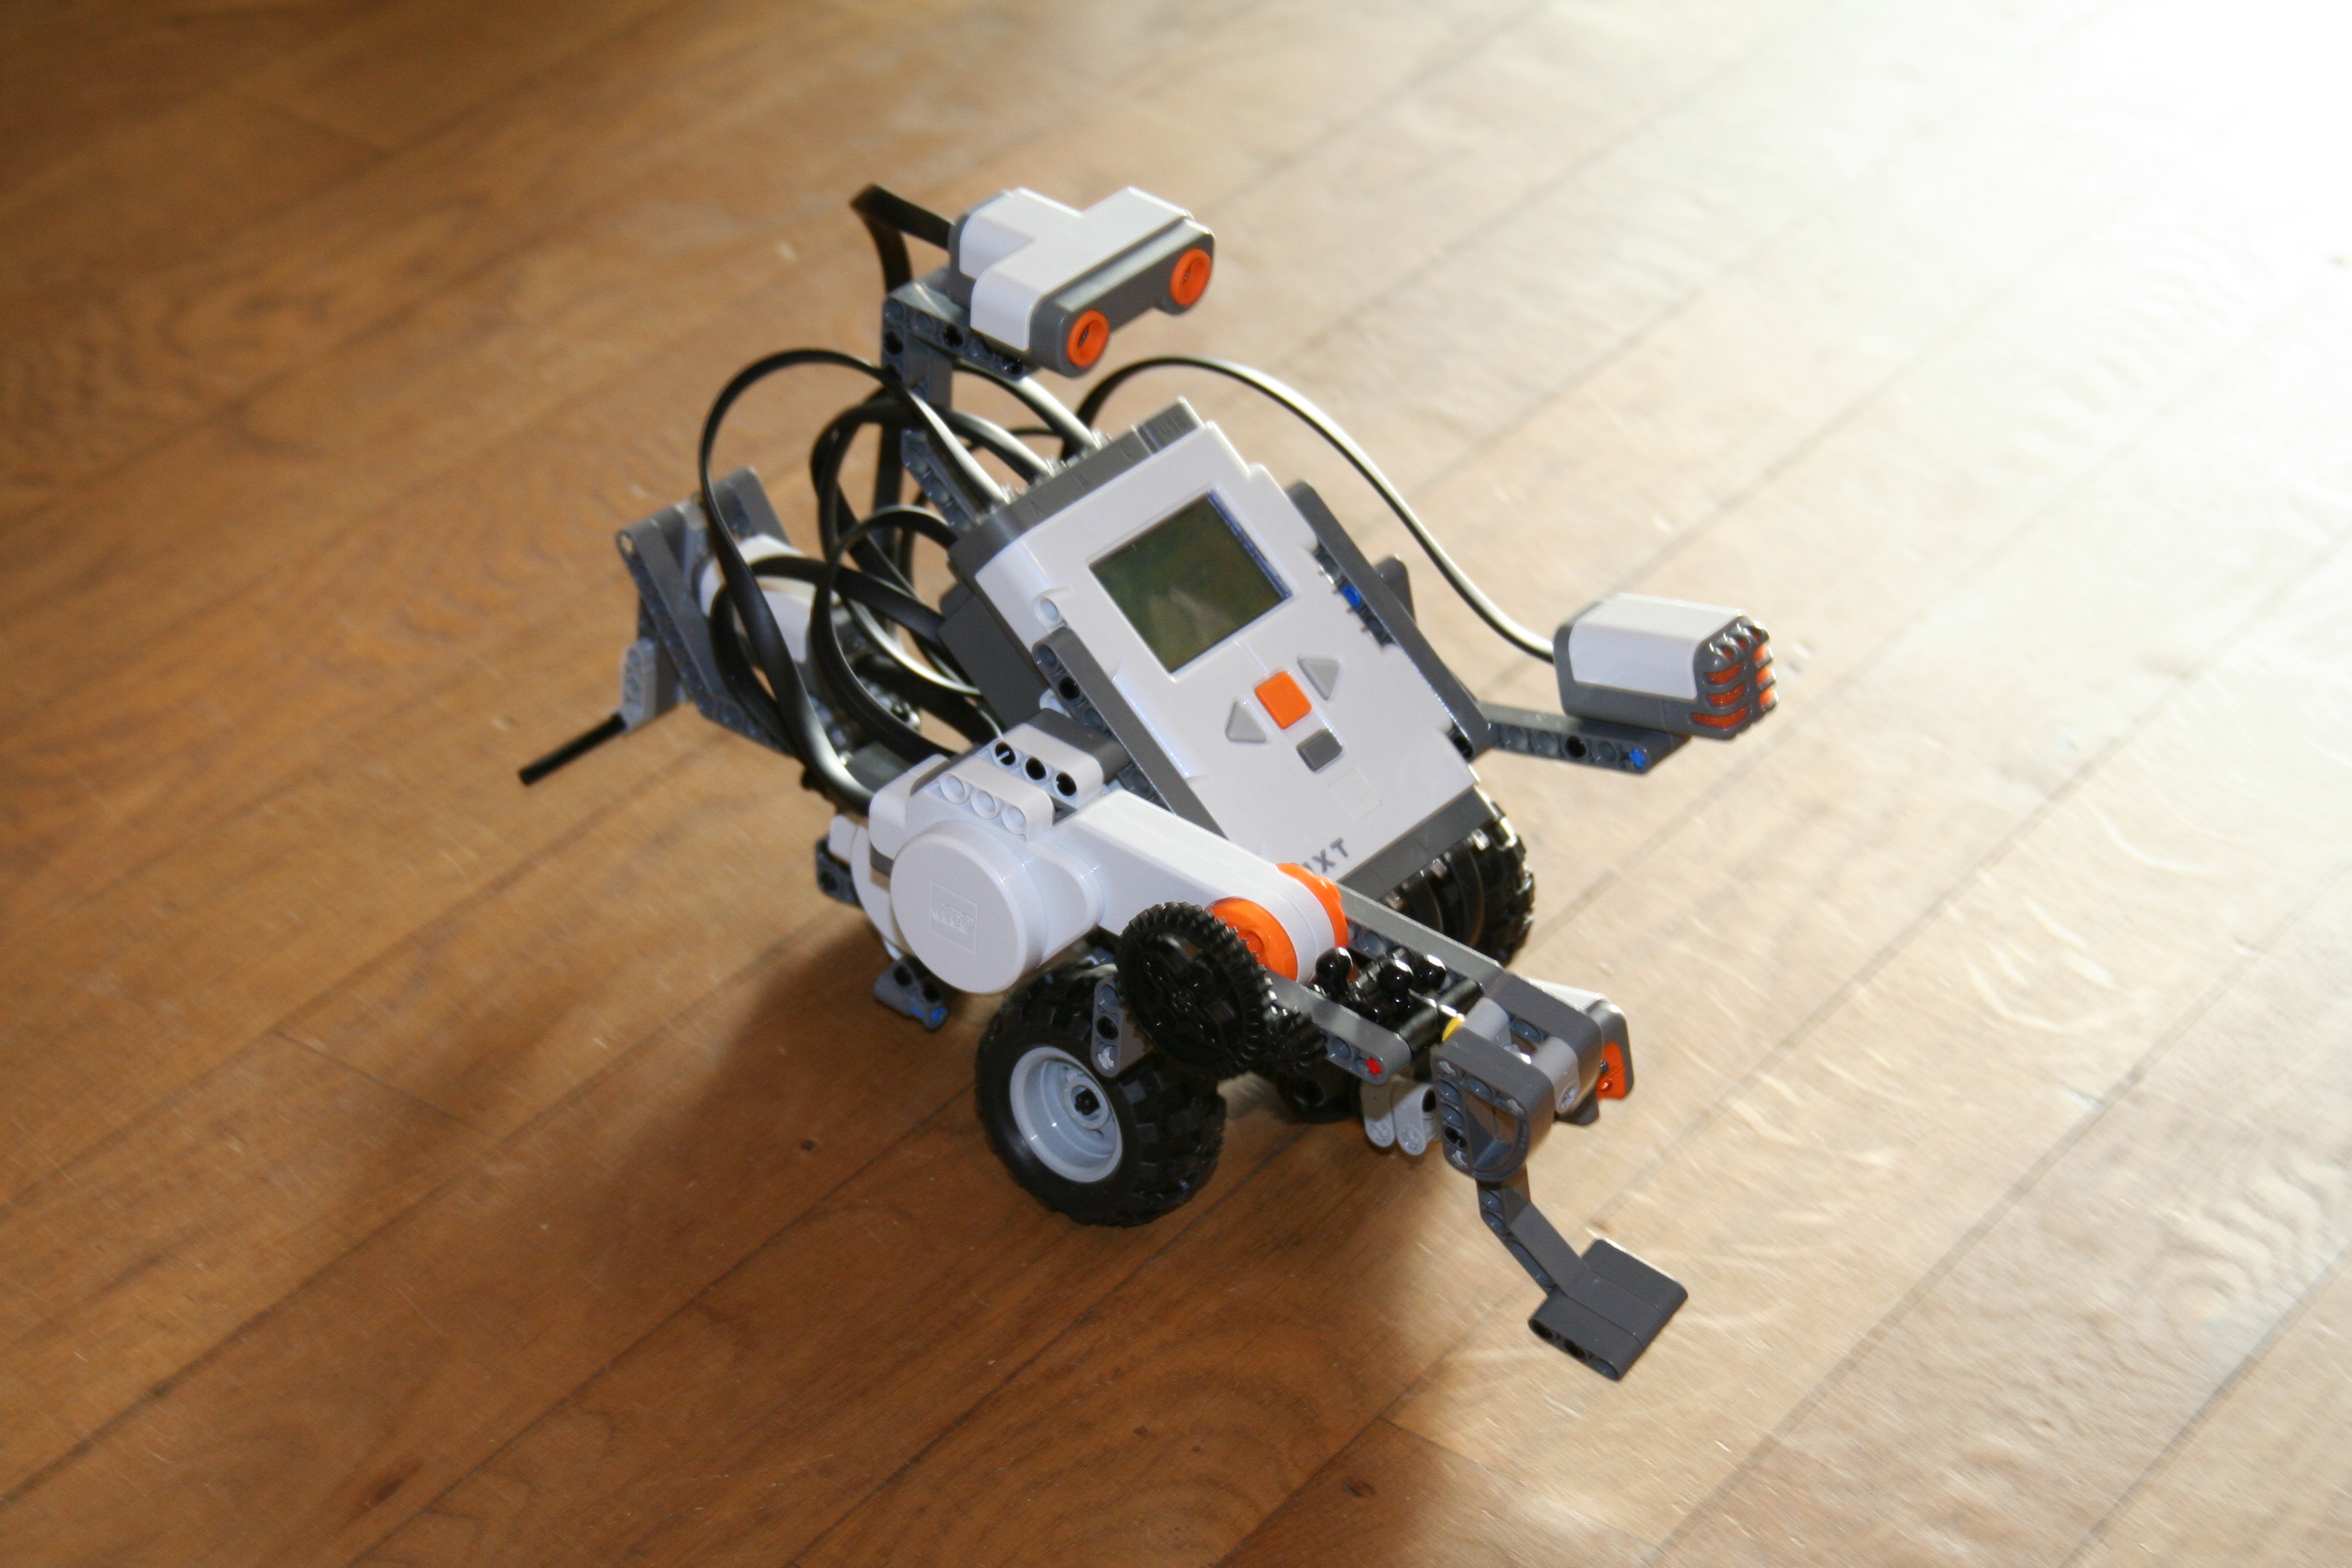 A Lego robot that can be programed to perform a variety of functions using Mindstorms NXT software.